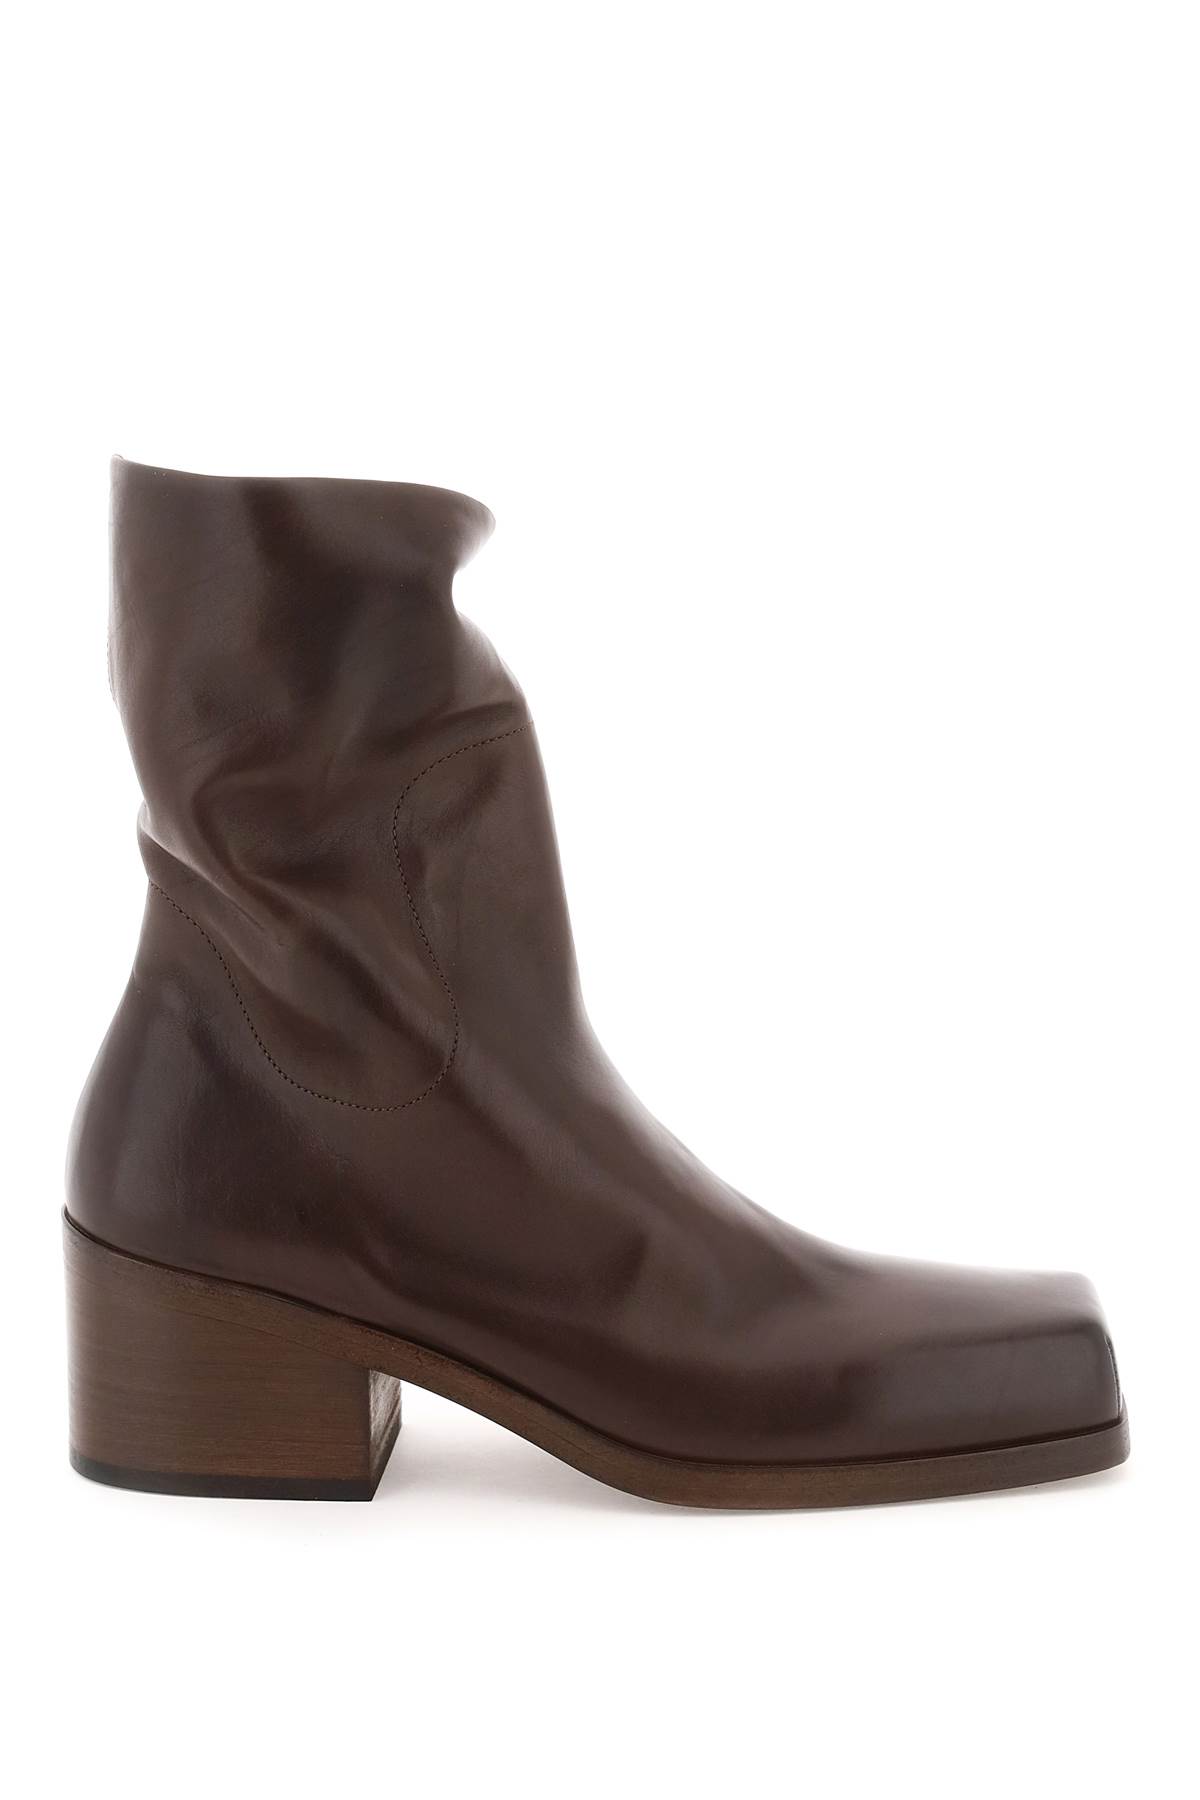 Marsell cassello Ankle Boots